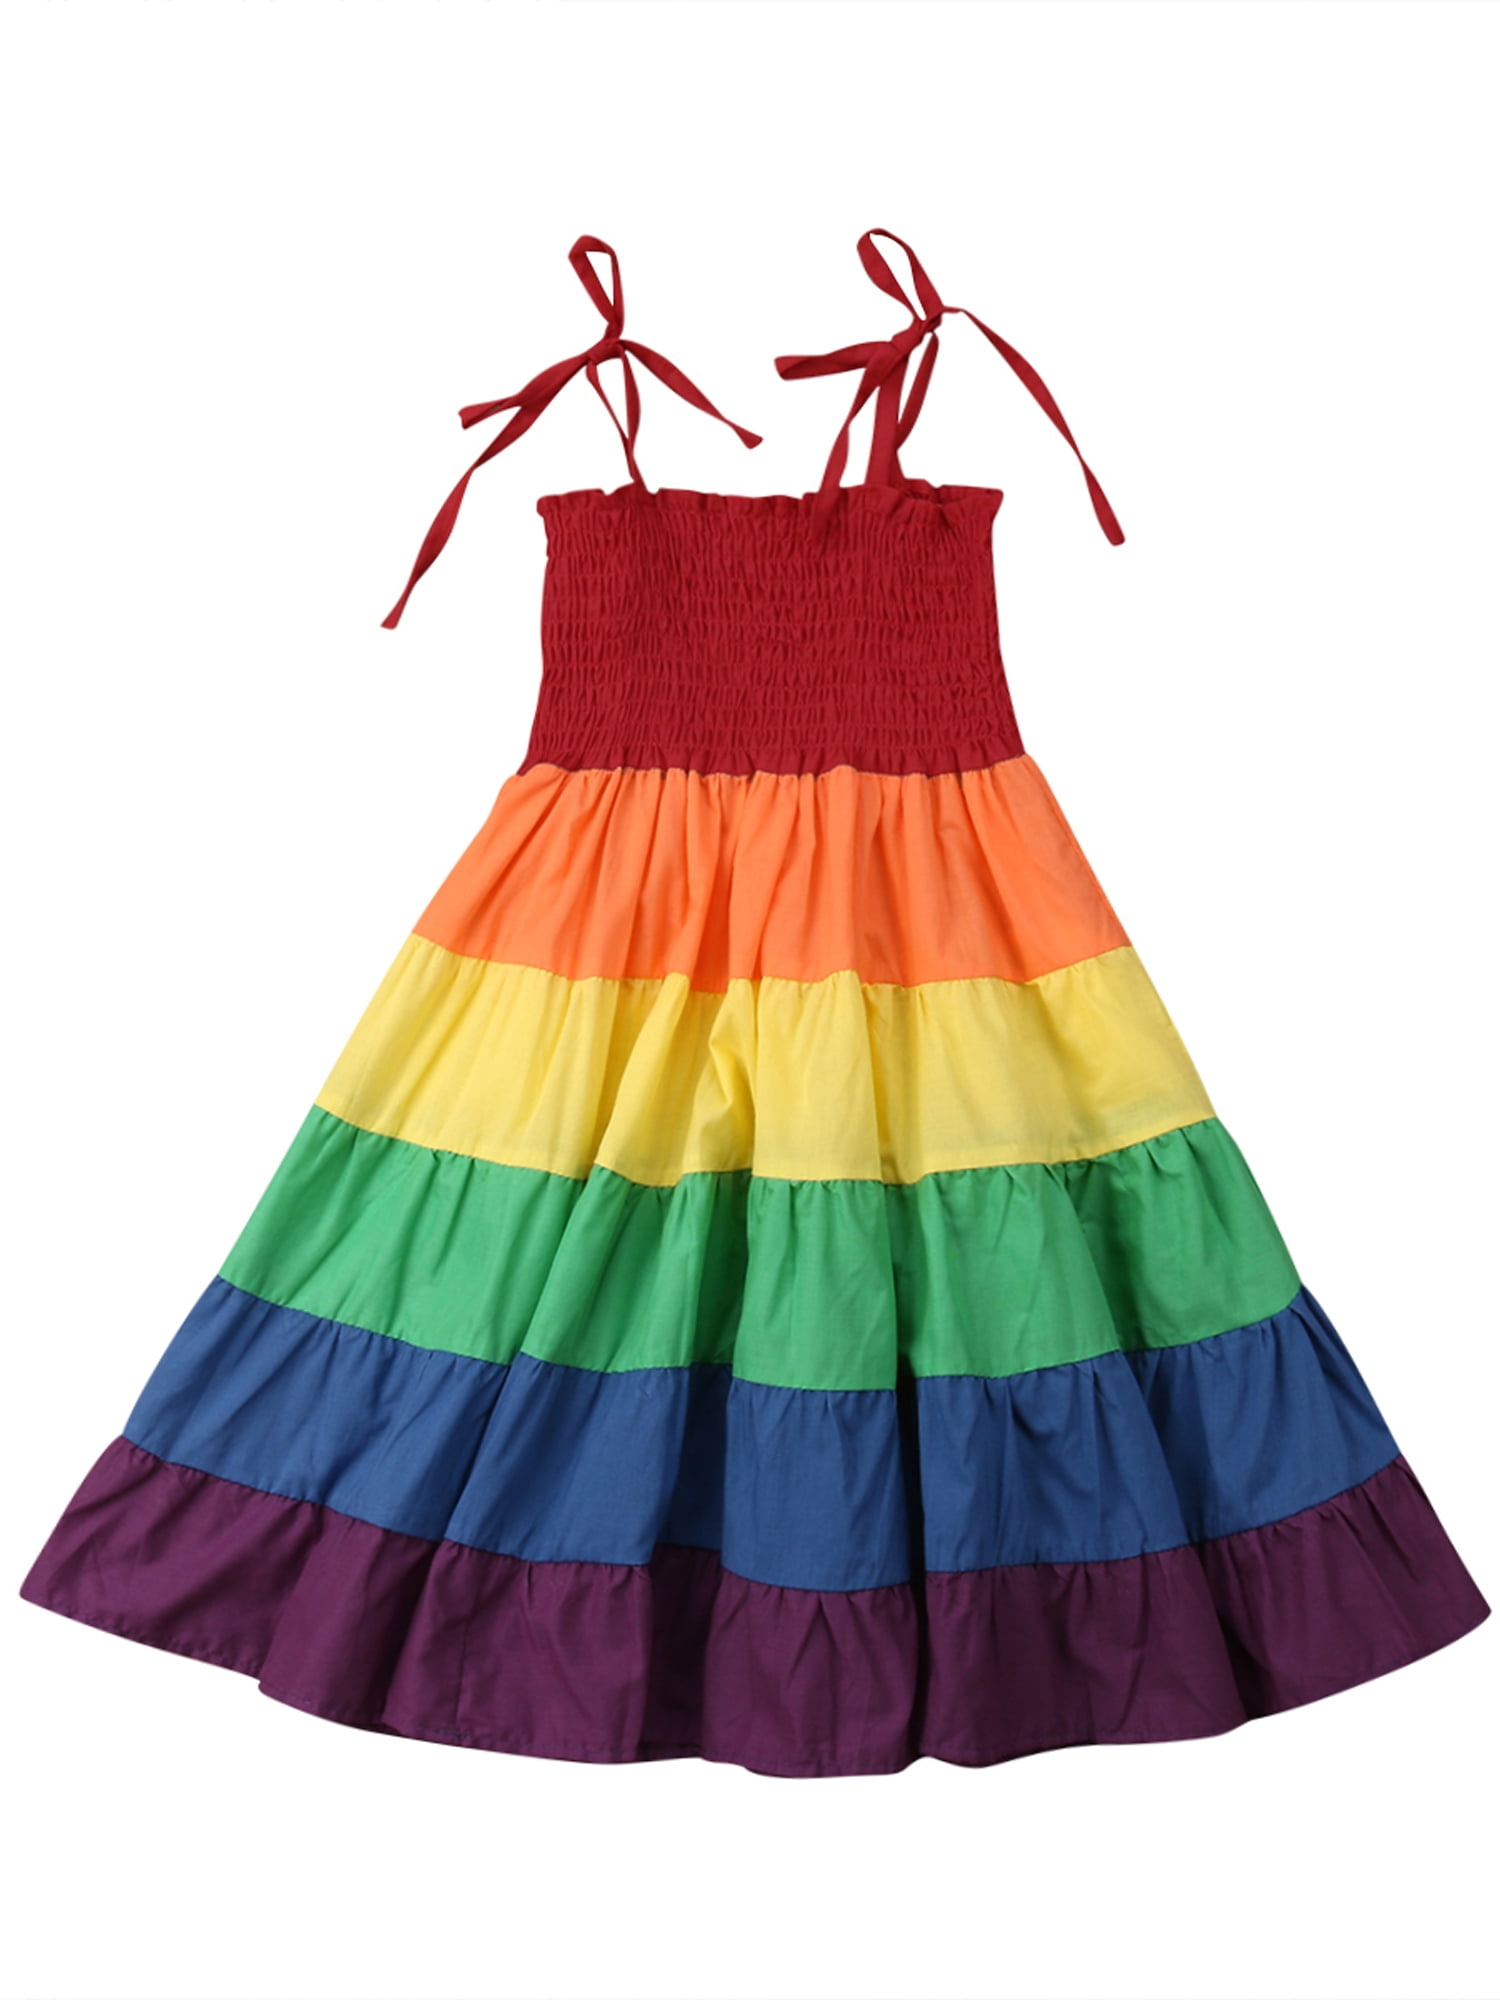 Baby Girls Sundress,Toddler Baby Kids Girls Ruched Rainbow Print Tulle Princess Dresses Clothes 2-7 Years 